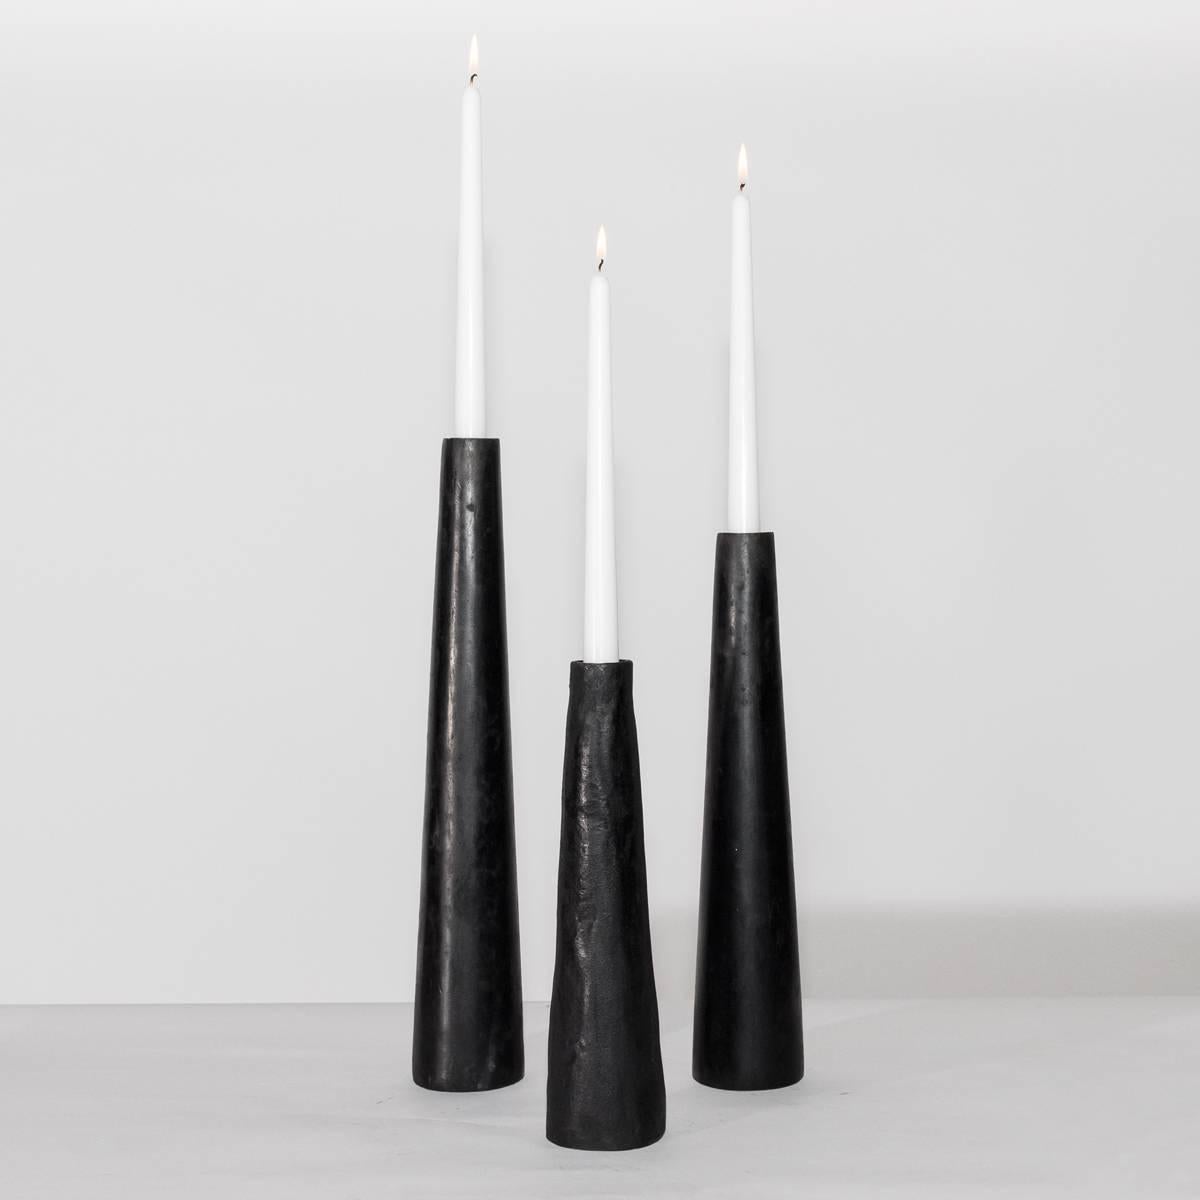 Bronze candlestick from Rick Owens home collection (size large) available from LMD/studio.

This solid bronze candle pillar or candlestick from Rick Owens home collection was designed by world famous fashion designer Rick Owens in collaboration